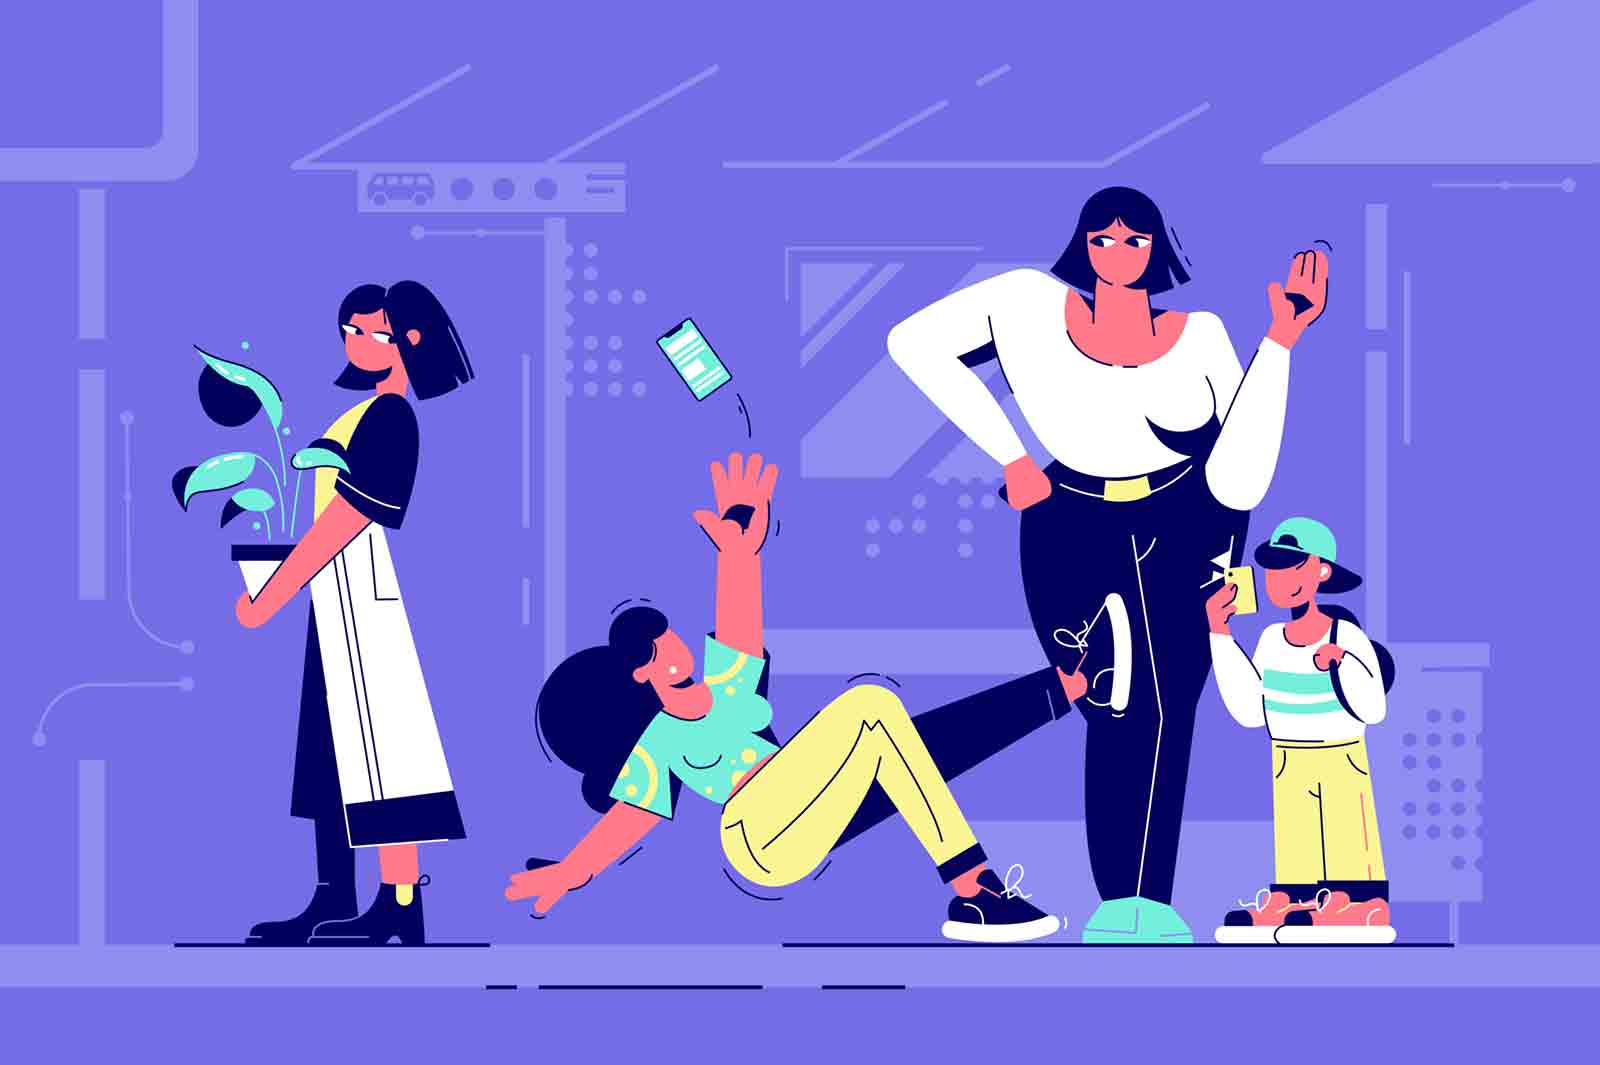 Indifferent people obserbers watching young girl fall and drop smartphone. Abstract concept of woman and boy character looking at human crash and shooting video. Vector illustration.